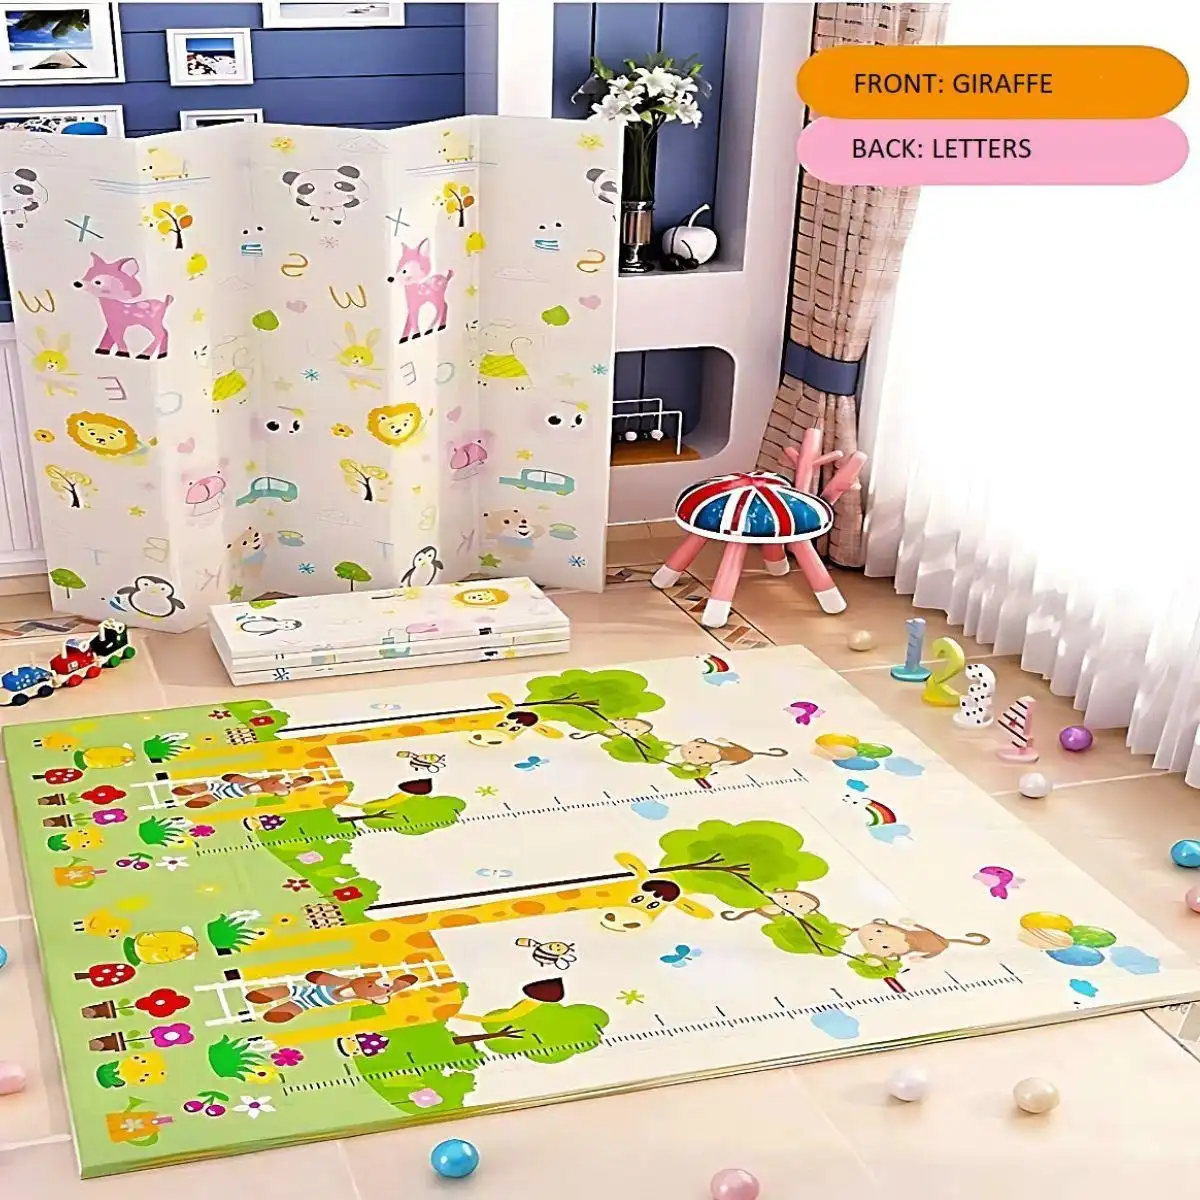 BabiesMart Large Play Mat 5-Layer, Waterproof, Non-Toxic, Double-Sided, Foldable Mat